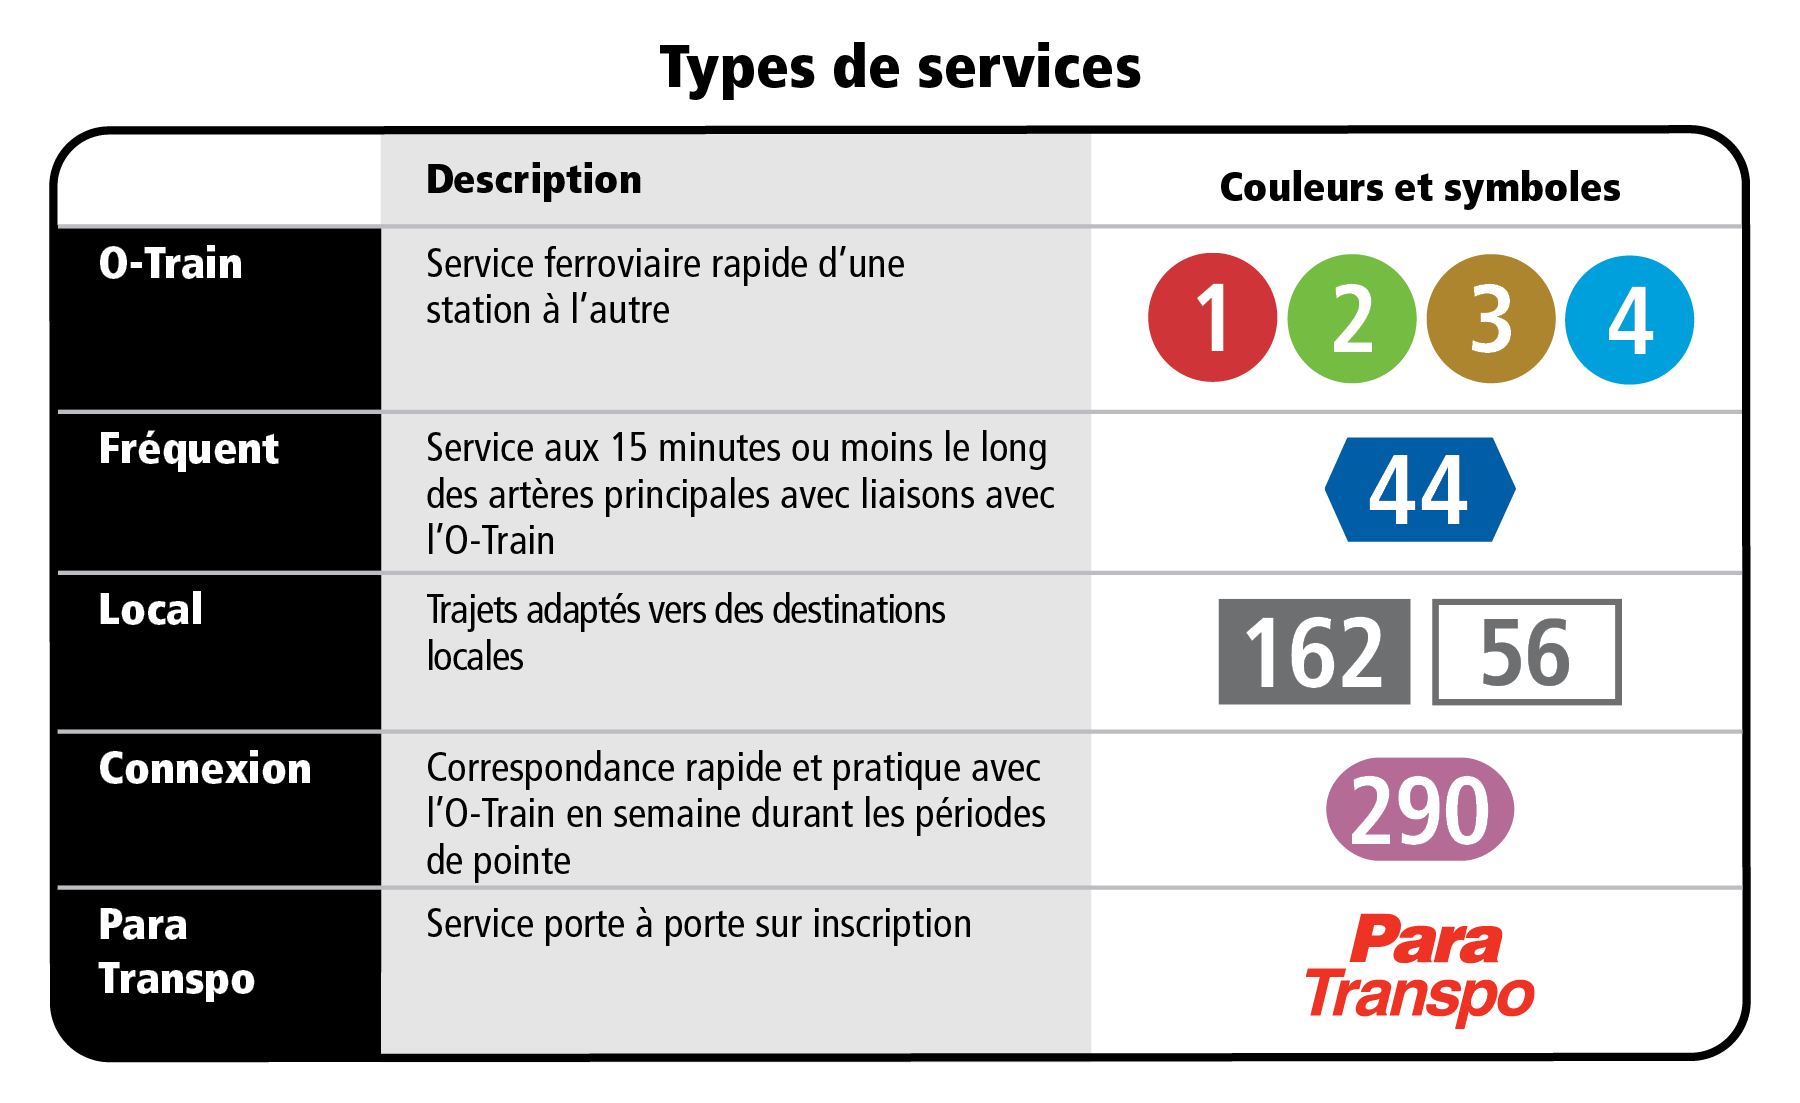 Graphic showing a table of service type, description, and symbol and colour